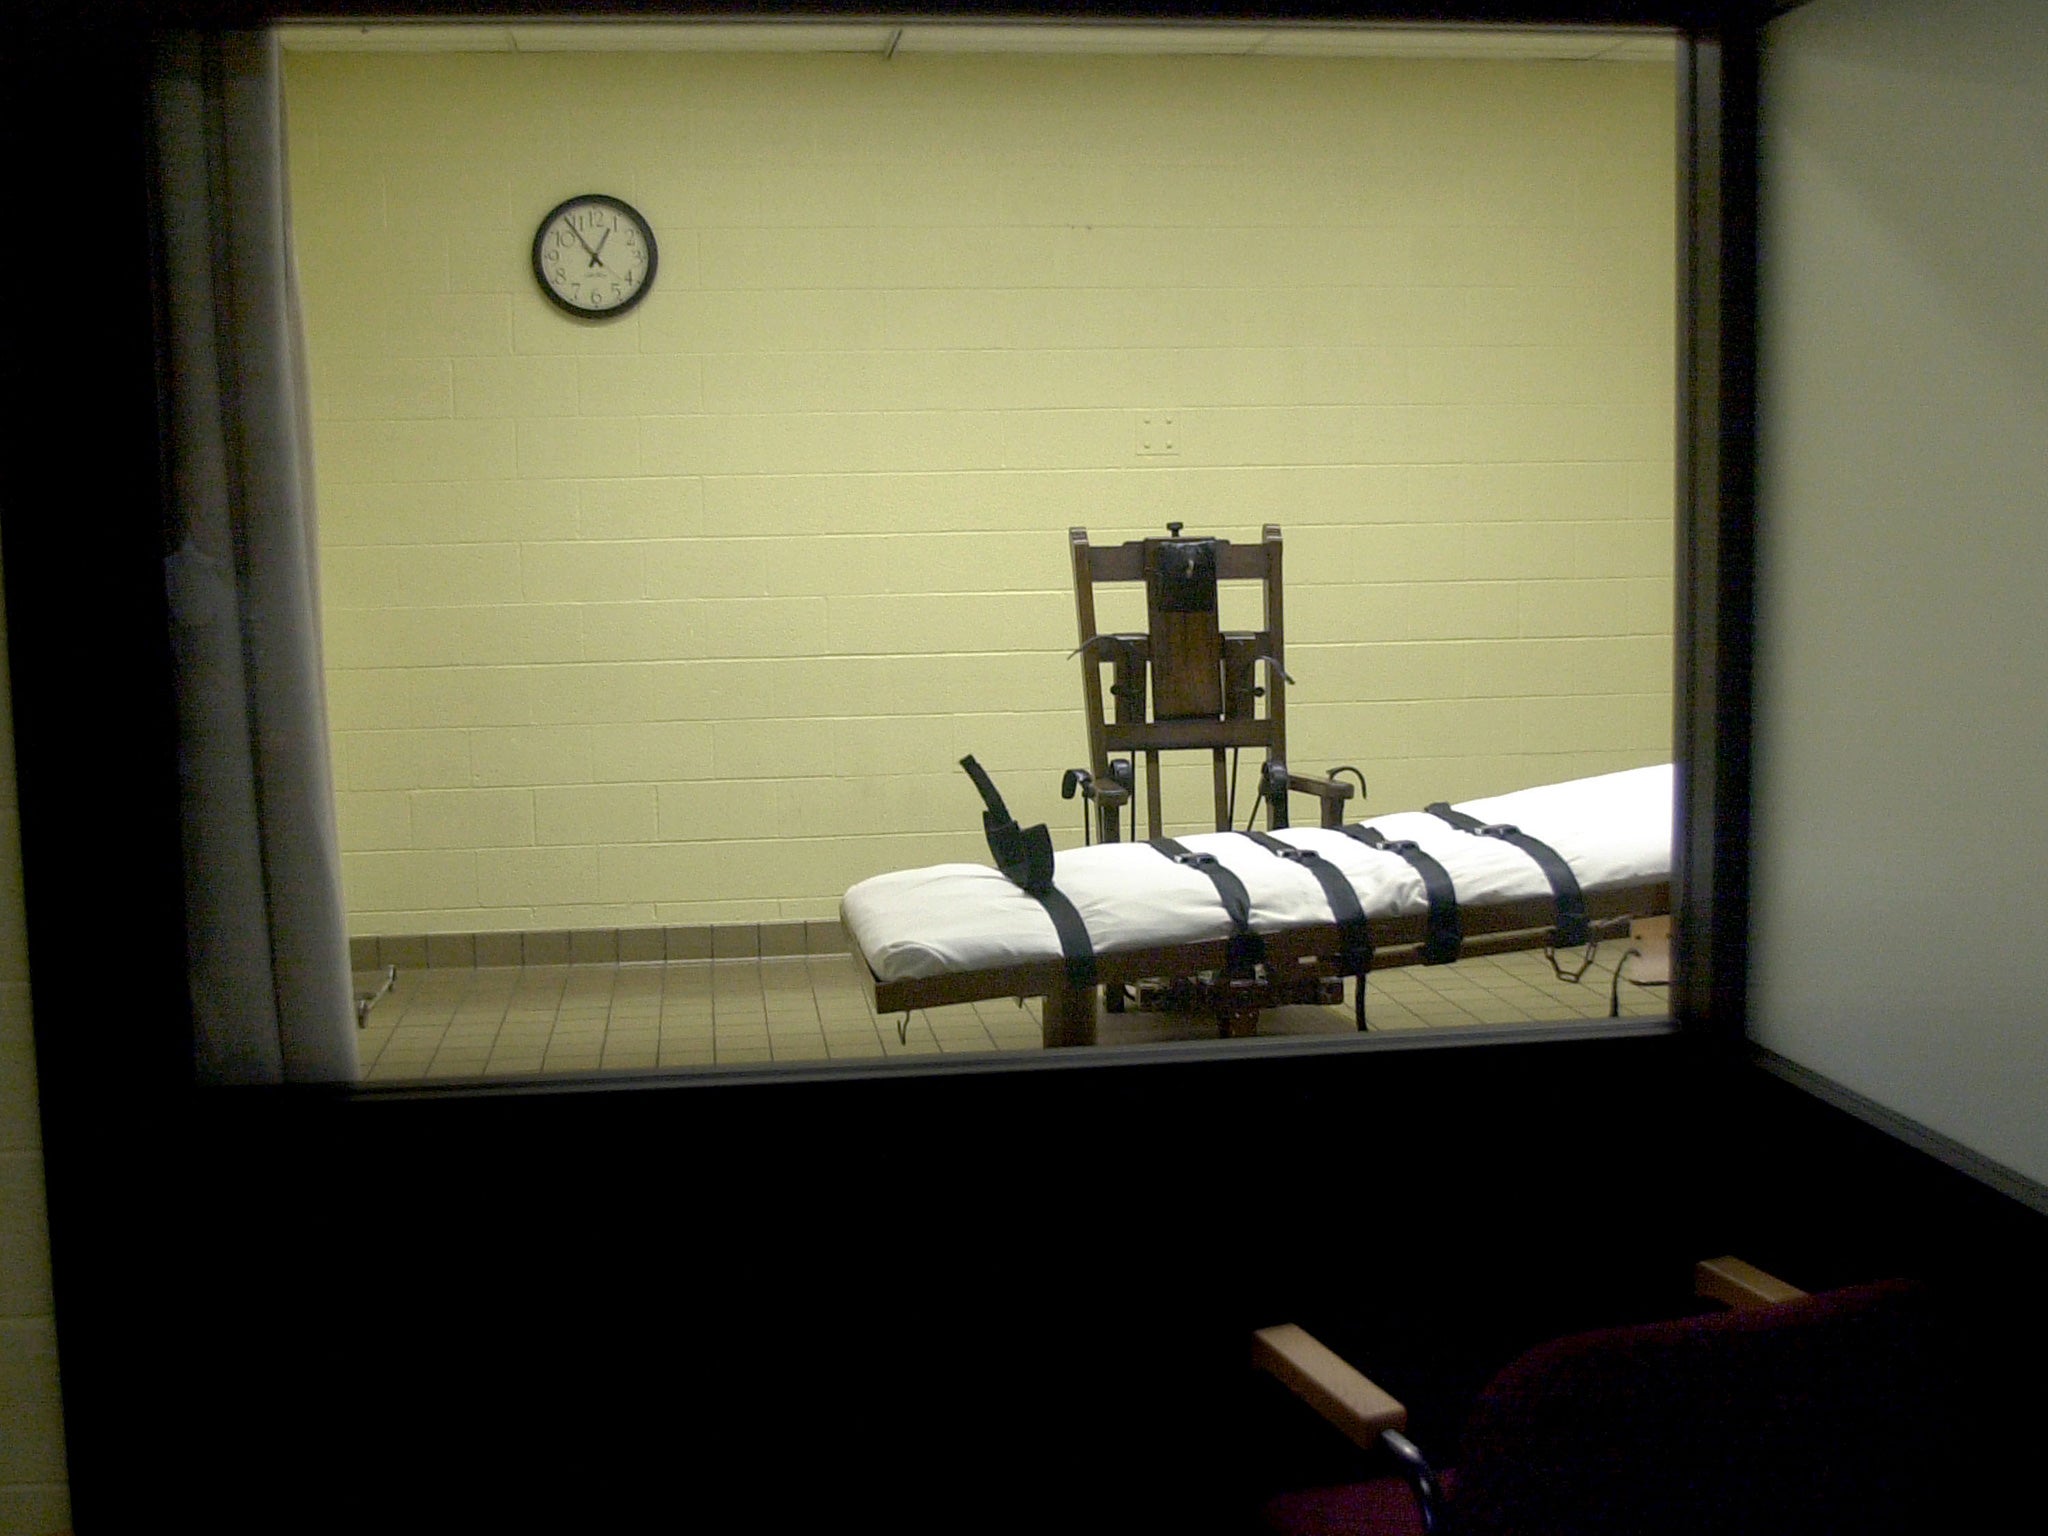 The lethal injection is the primary method of execution in 33 states